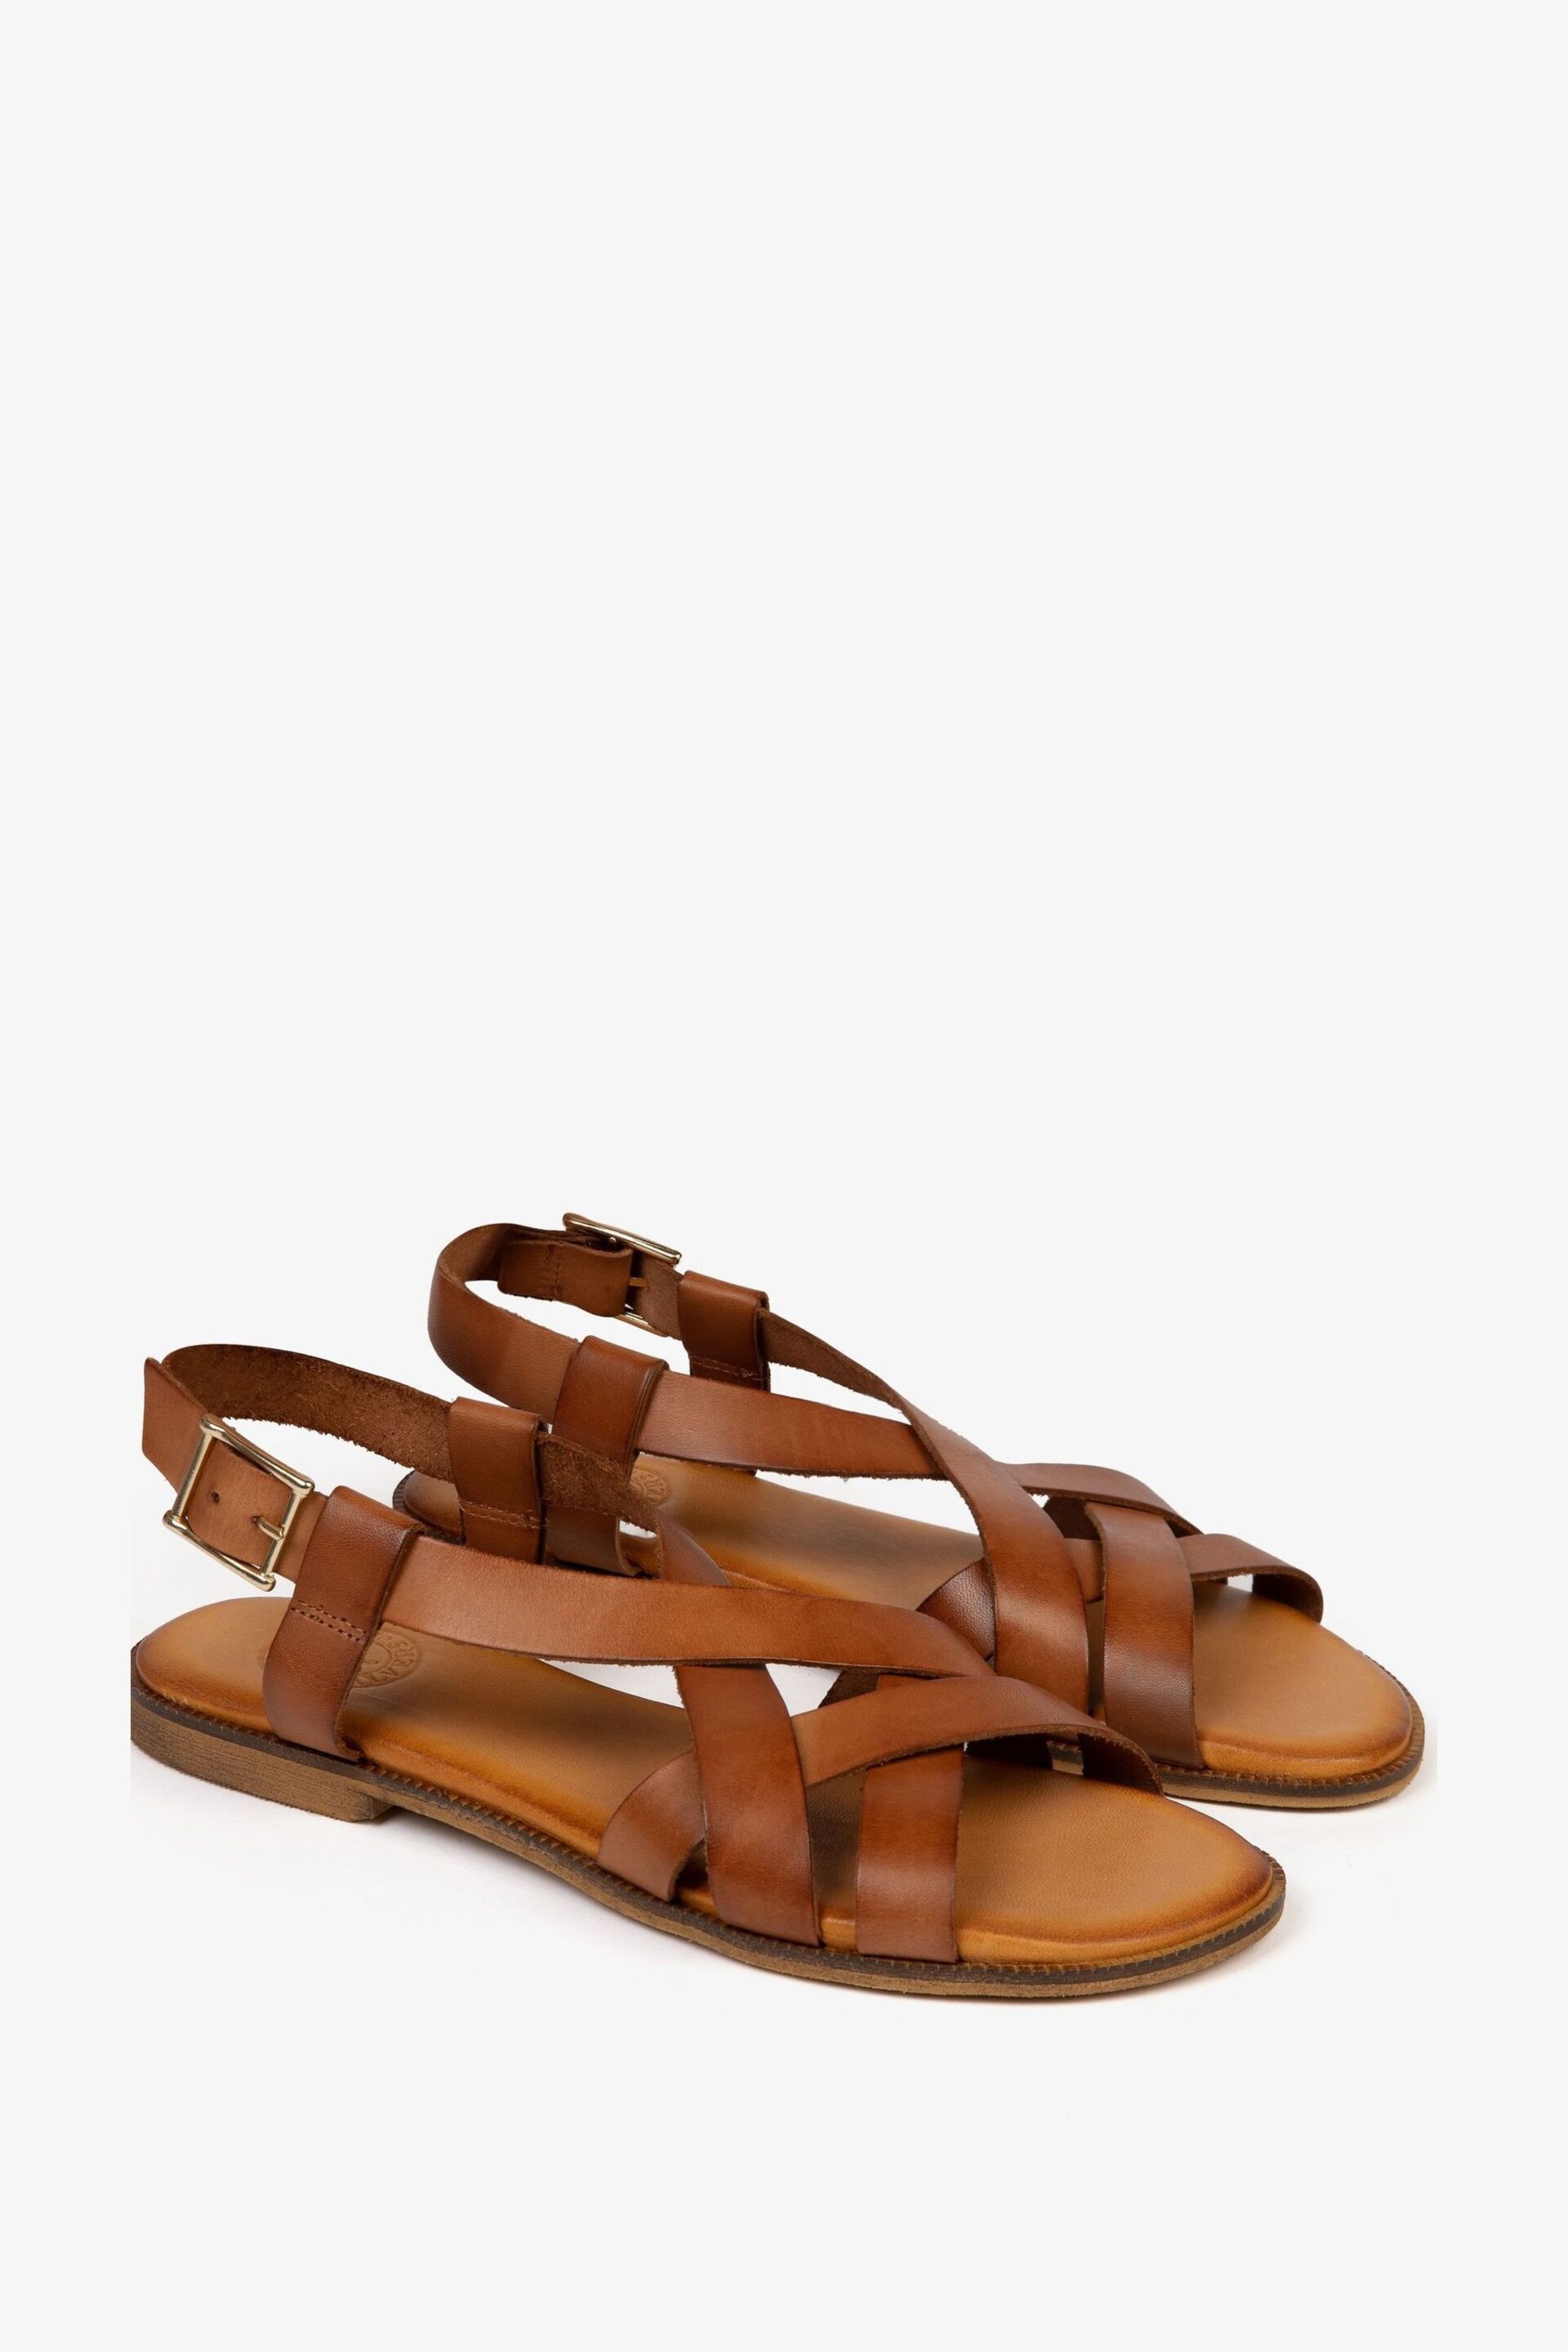 Penelope Chilvers Buttercup Brown Leather Sandals - Image 2 of 5